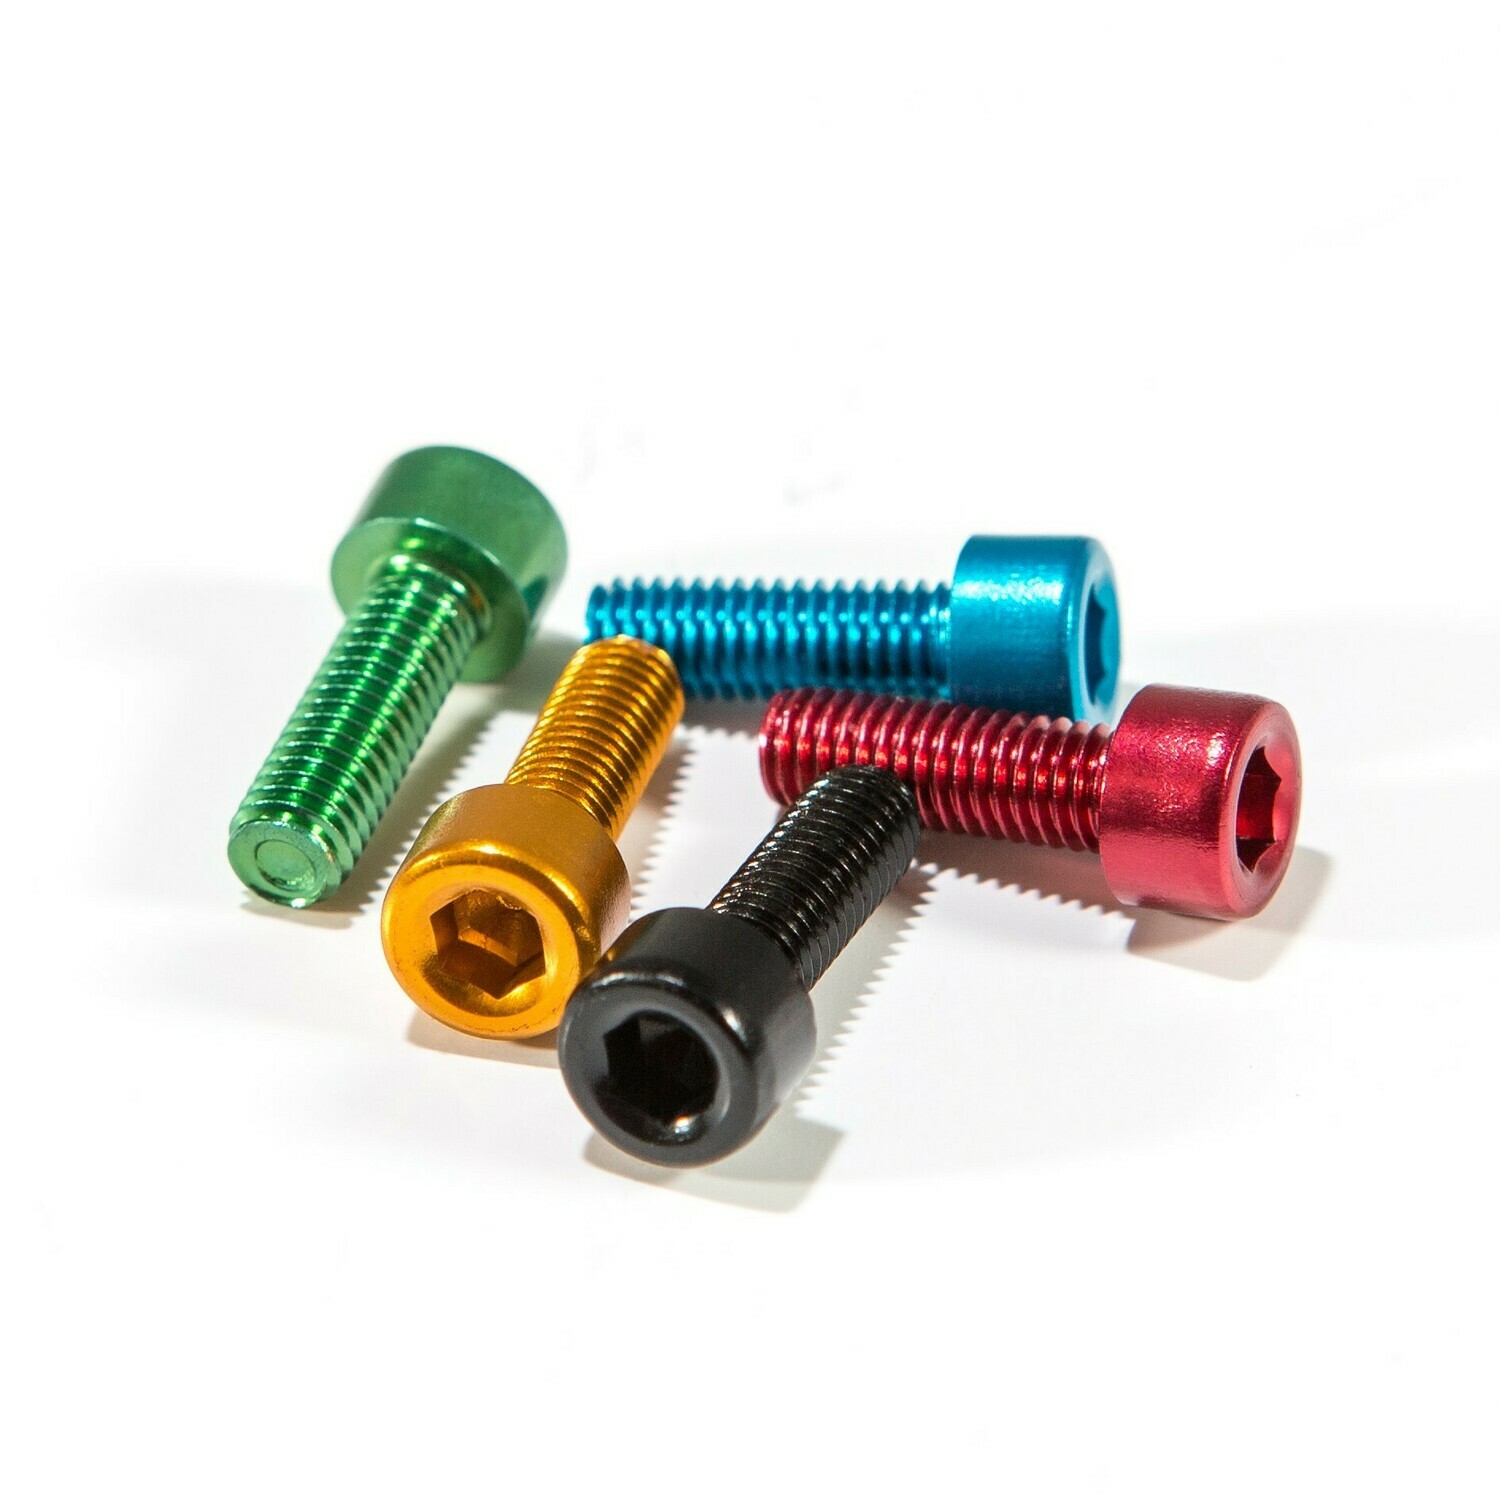 Anodised M5 X 15mm Bottle Cage / Rack Bolts